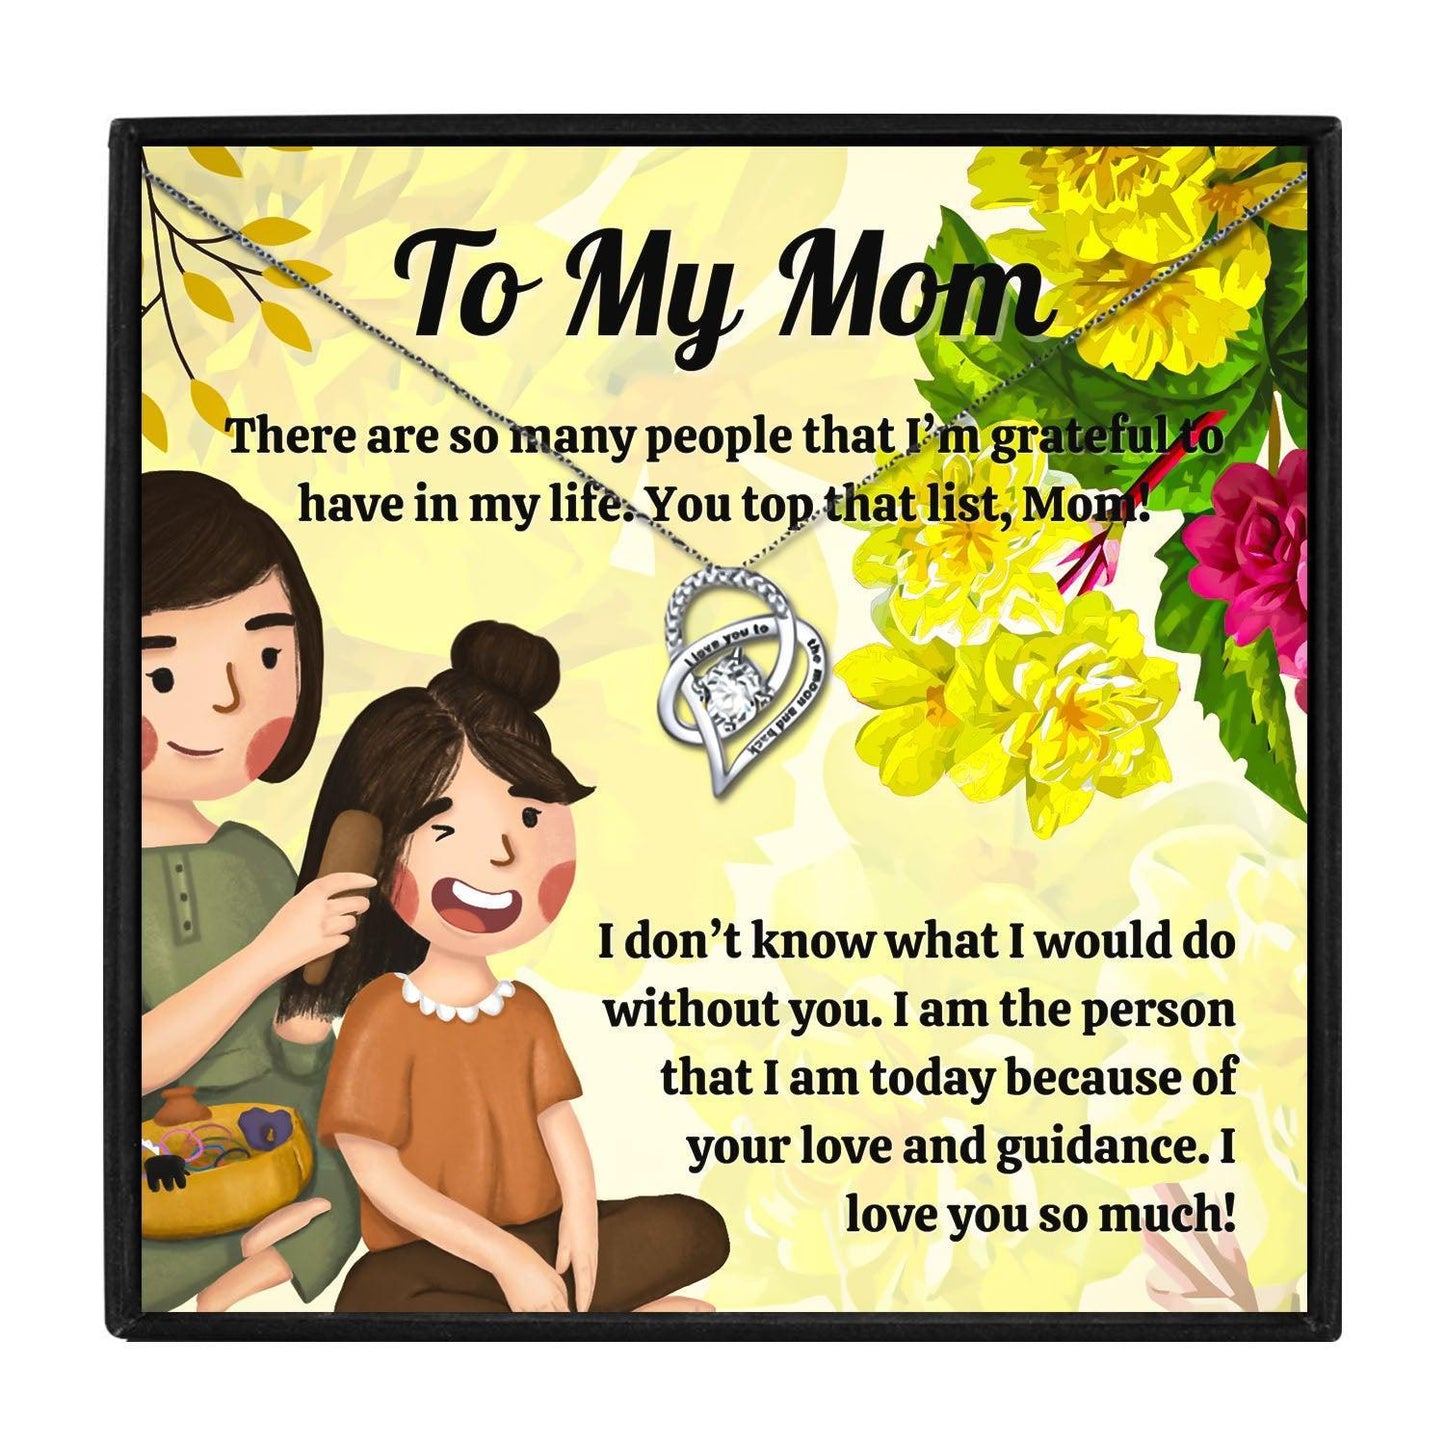 To My Loving Mom Necklace From Daughter in 2023 | To My Loving Mom Necklace From Daughter - undefined | gift, gift for mom, gift ideas, Gift Necklace, Gifts, Gifts for Bonus Mom, mom birthday gift, mom gift, mom gift ideas, Mom Necklace, Mom Necklace Gift, necklace, Necklaces, other necklace | From Hunny Life | hunnylife.com